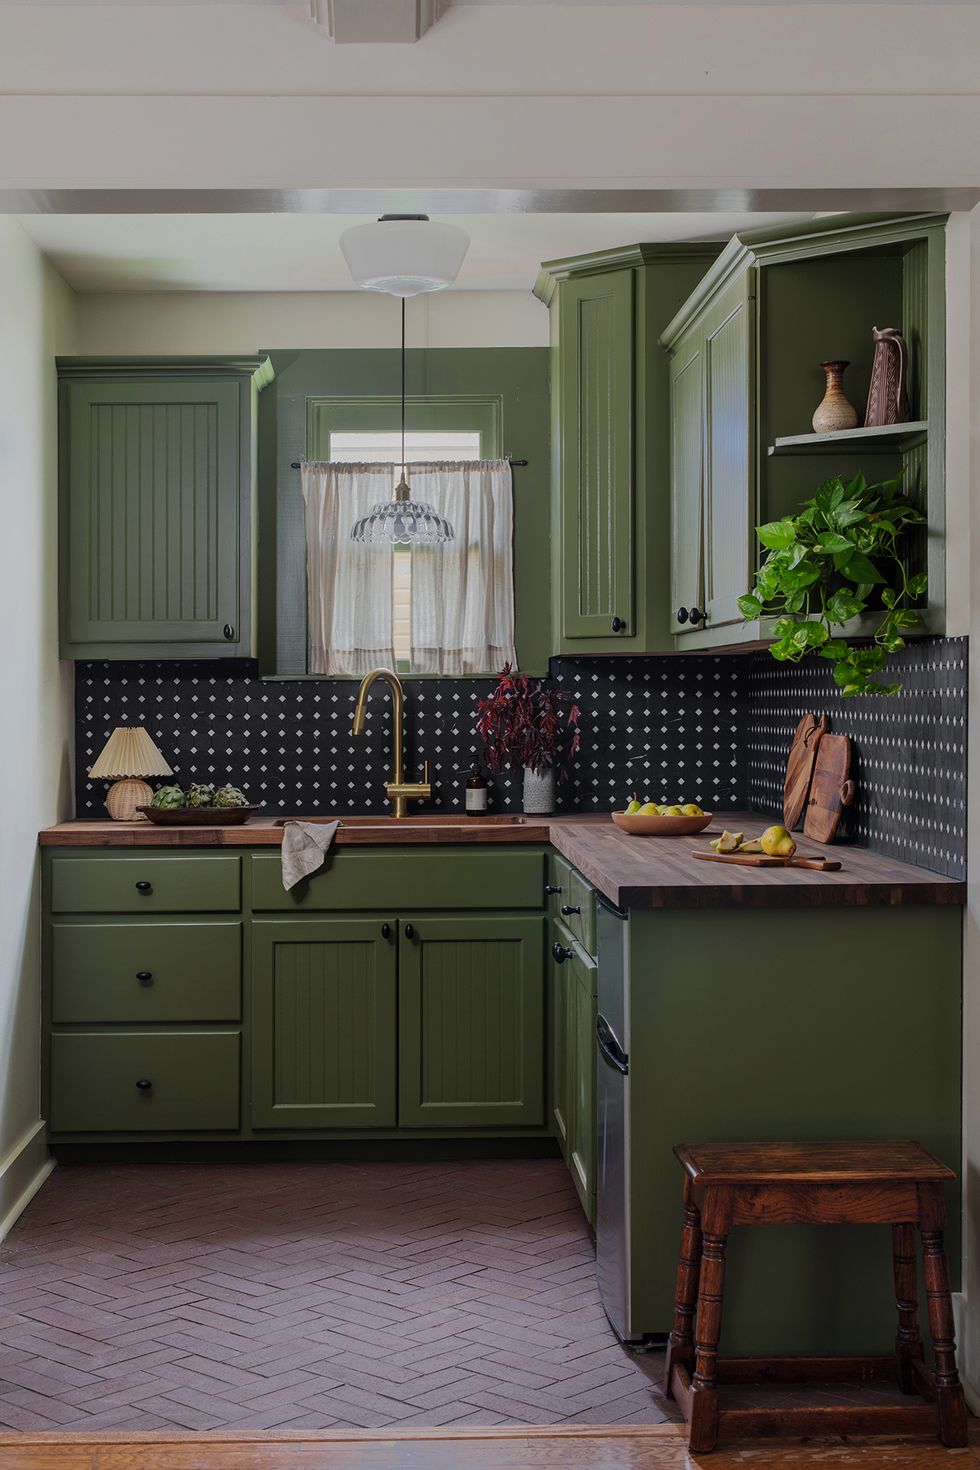 Essential Elements of a Classic Kitchen Design